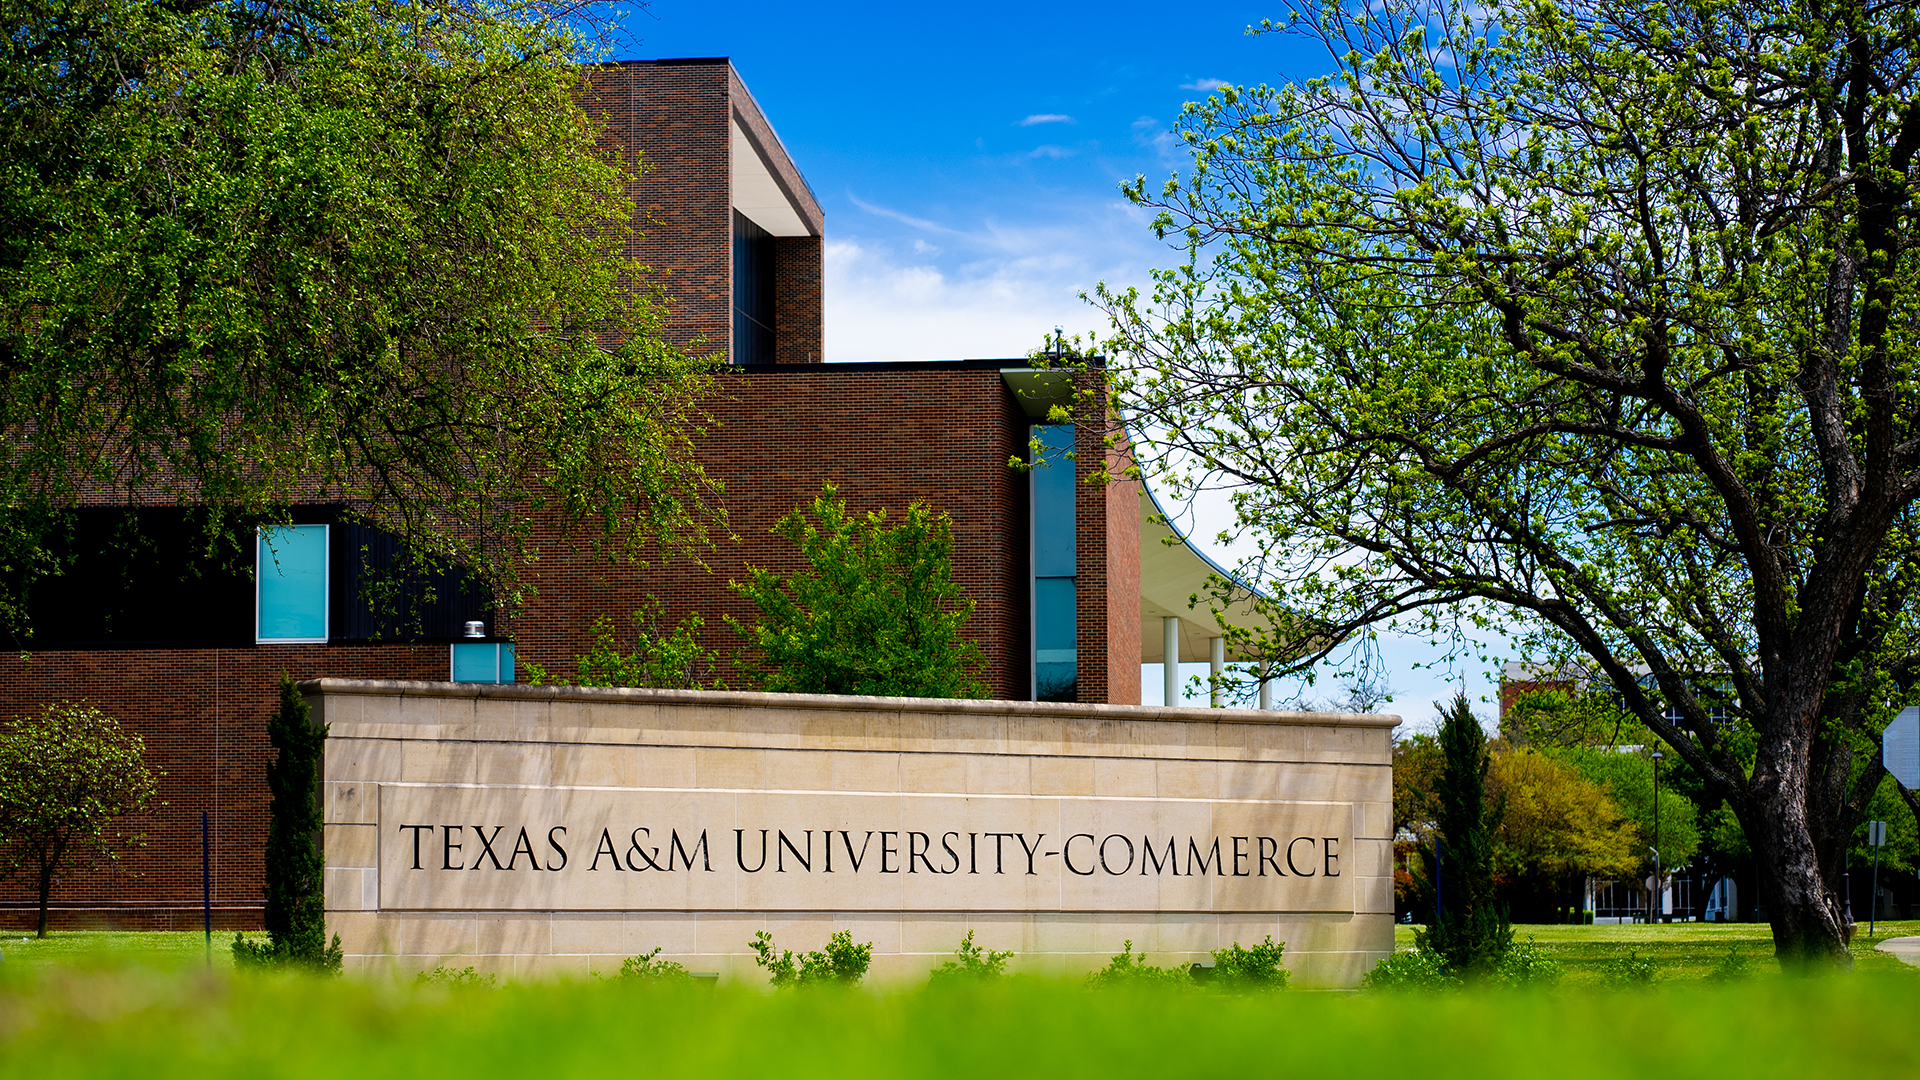 Stone monument with Texas A&M University-Commerce name on campus.